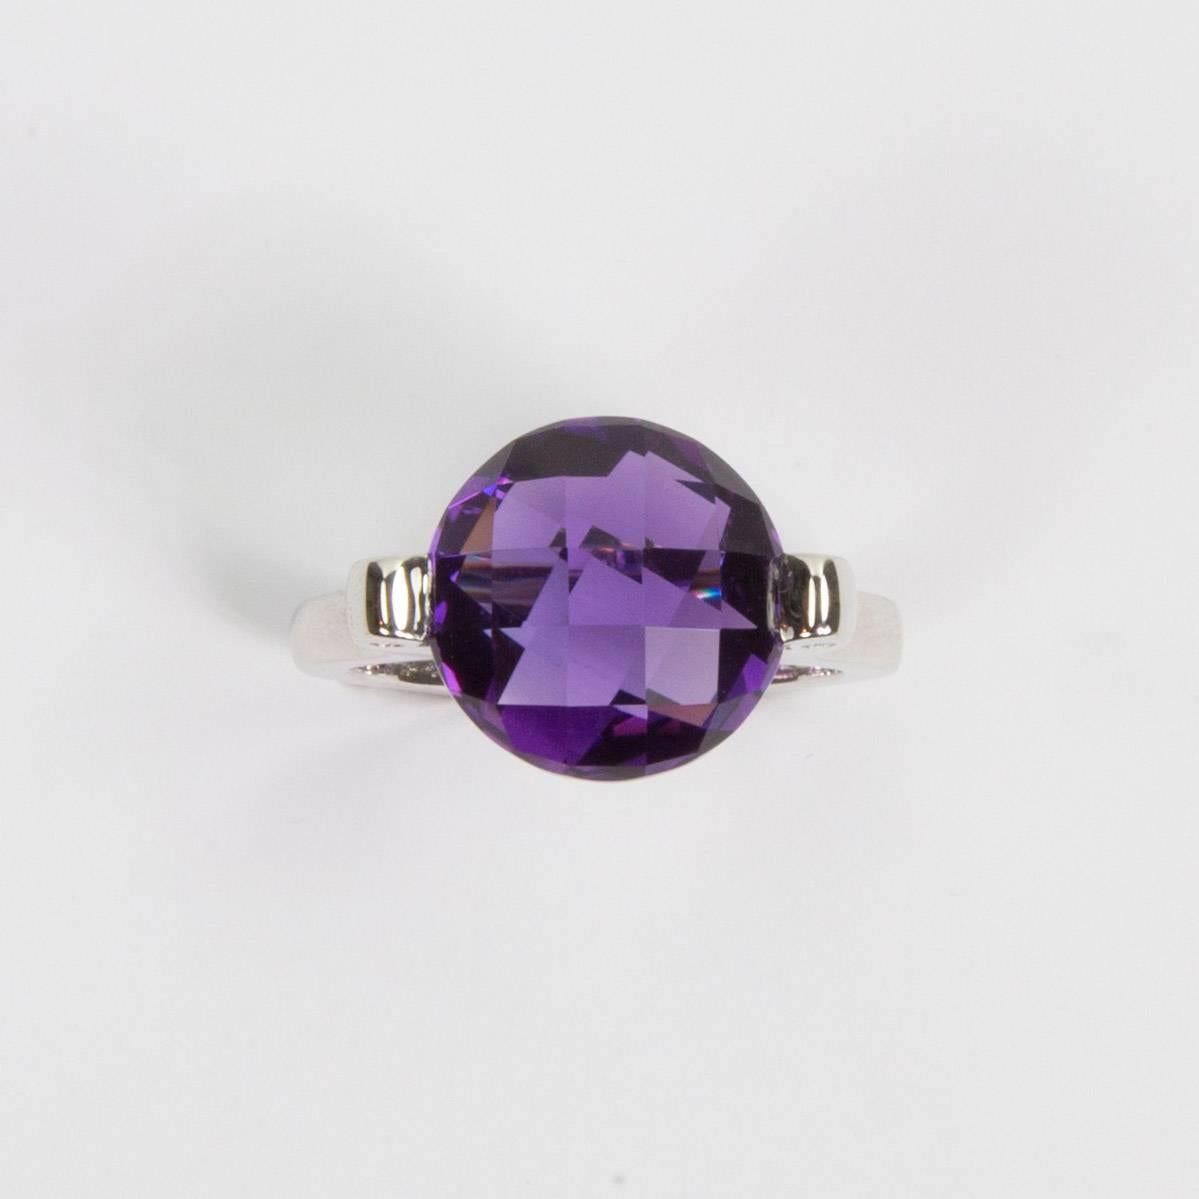 Beautiful Dynamic Solitaire Ring featuring a 15mm Checkerboard Amethyst, enhanced  either side by 2 CZ; great attention to detail! Distinctive Sterling Silver Tarnish-resistant Rhodium mounting; marked: 925; Size 8.5; ring re-sizing available on